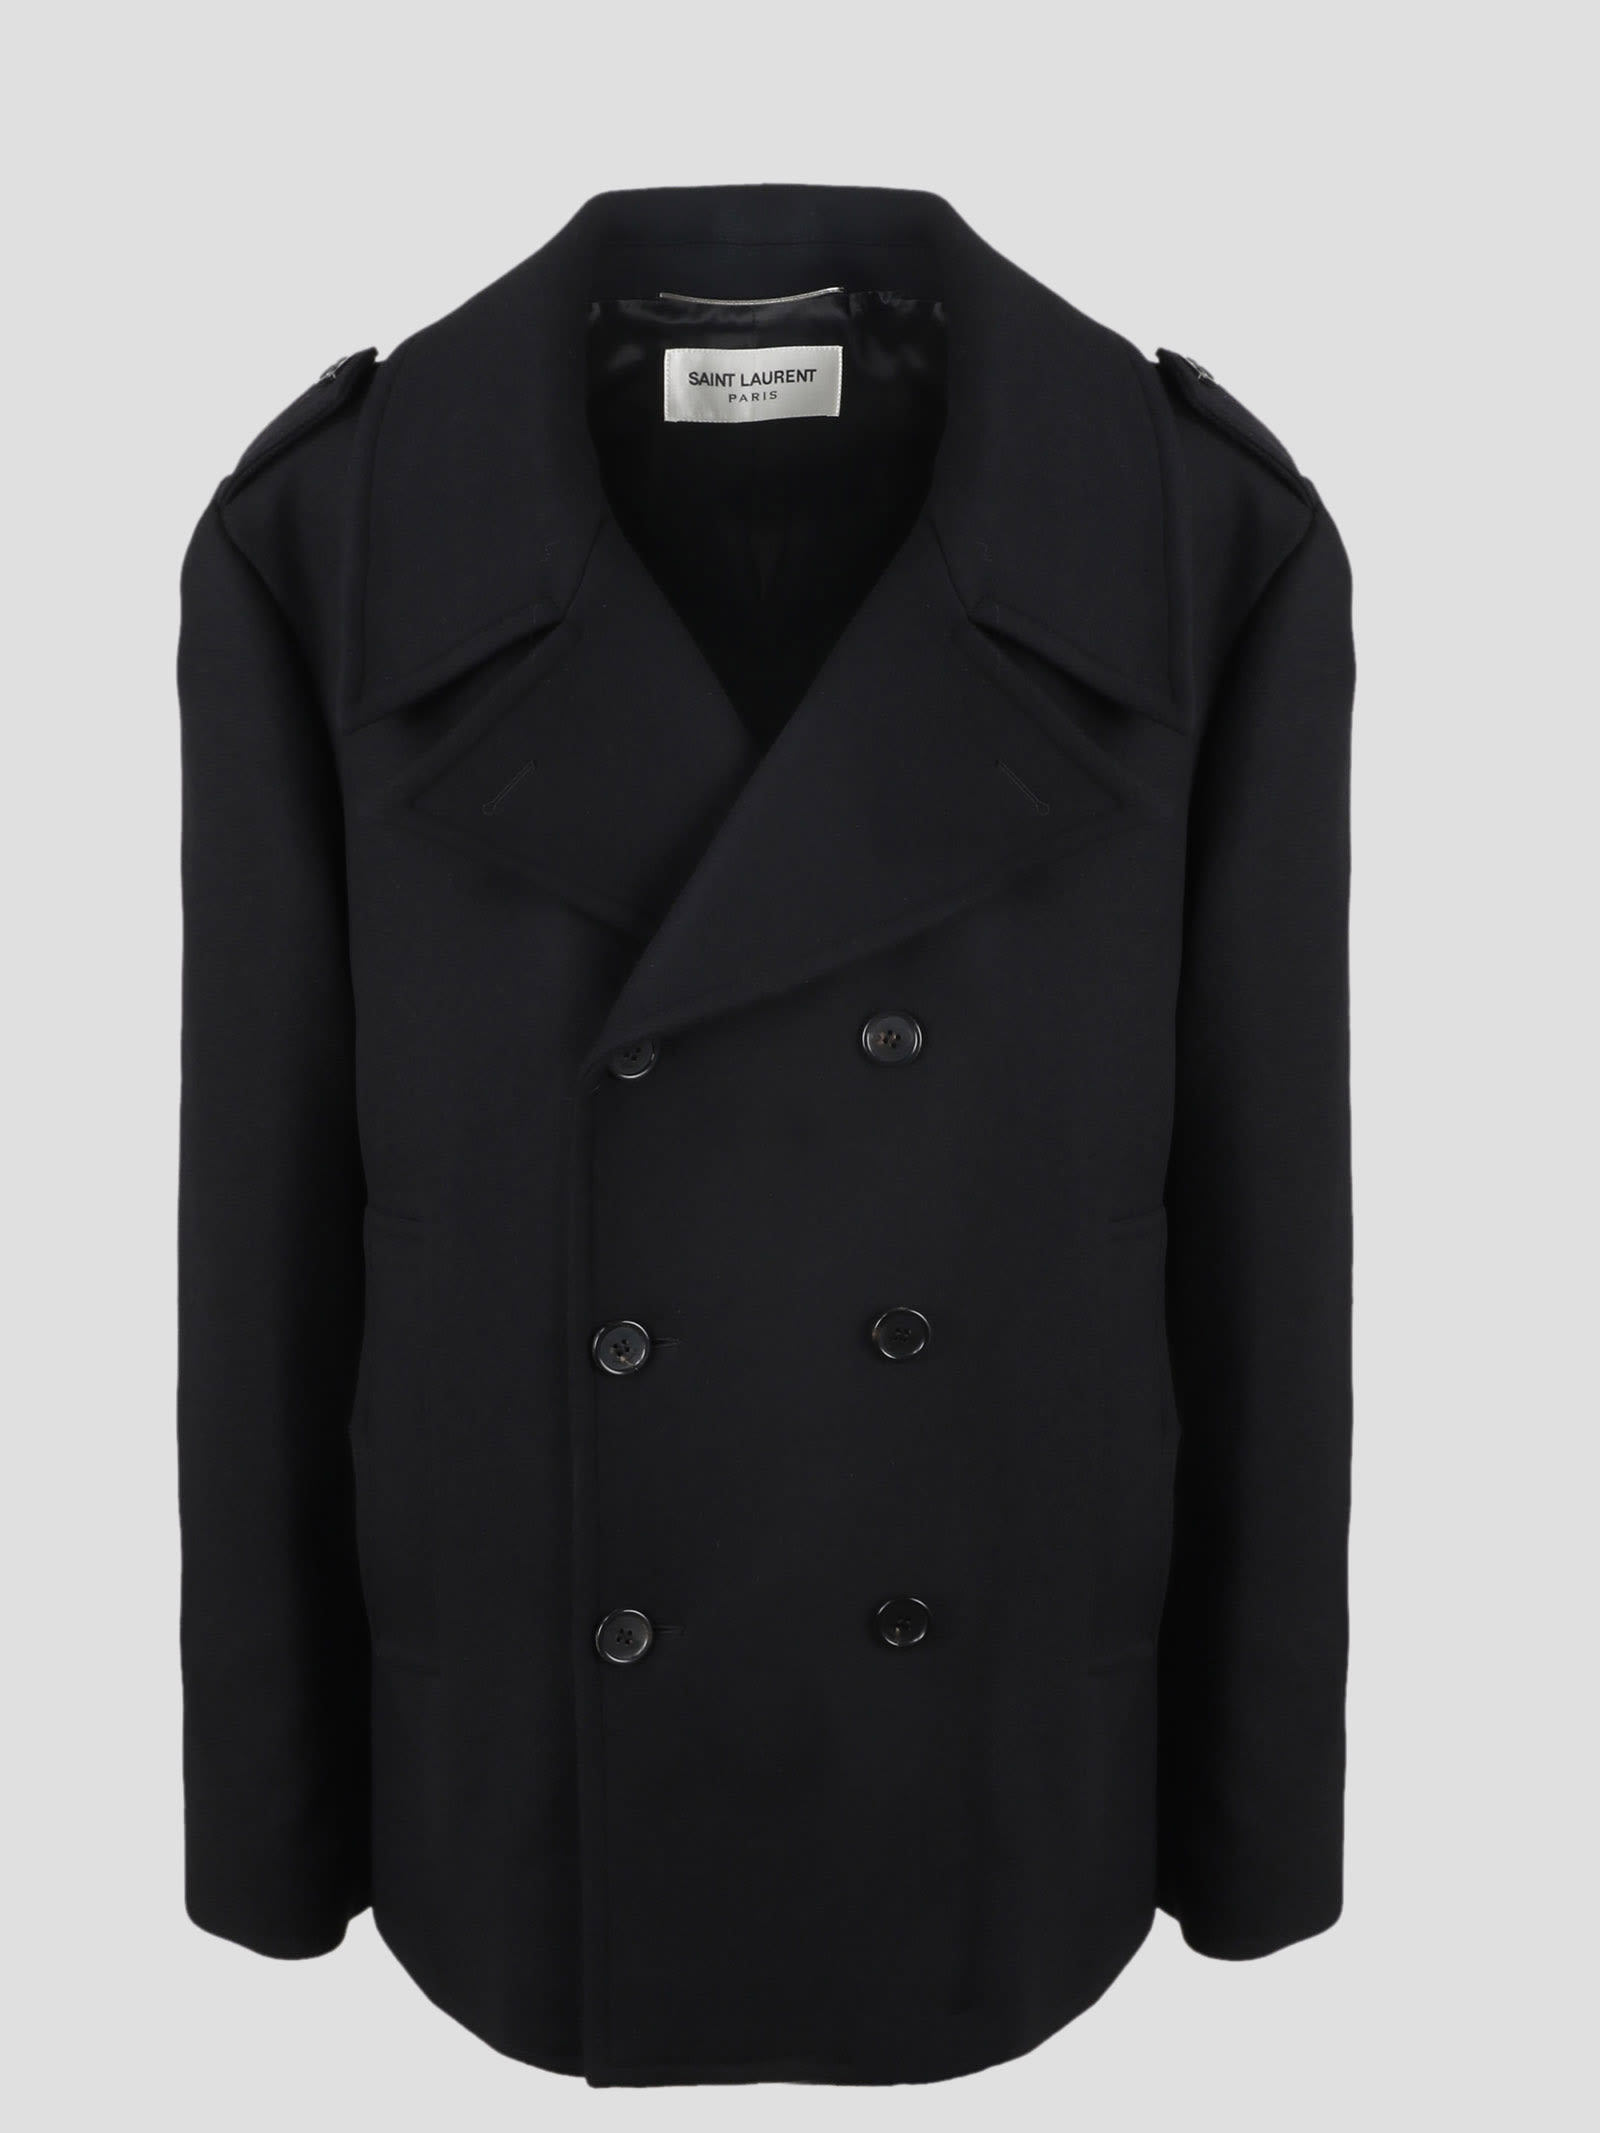 Saint Laurent Wool Double Breasted Peacoat